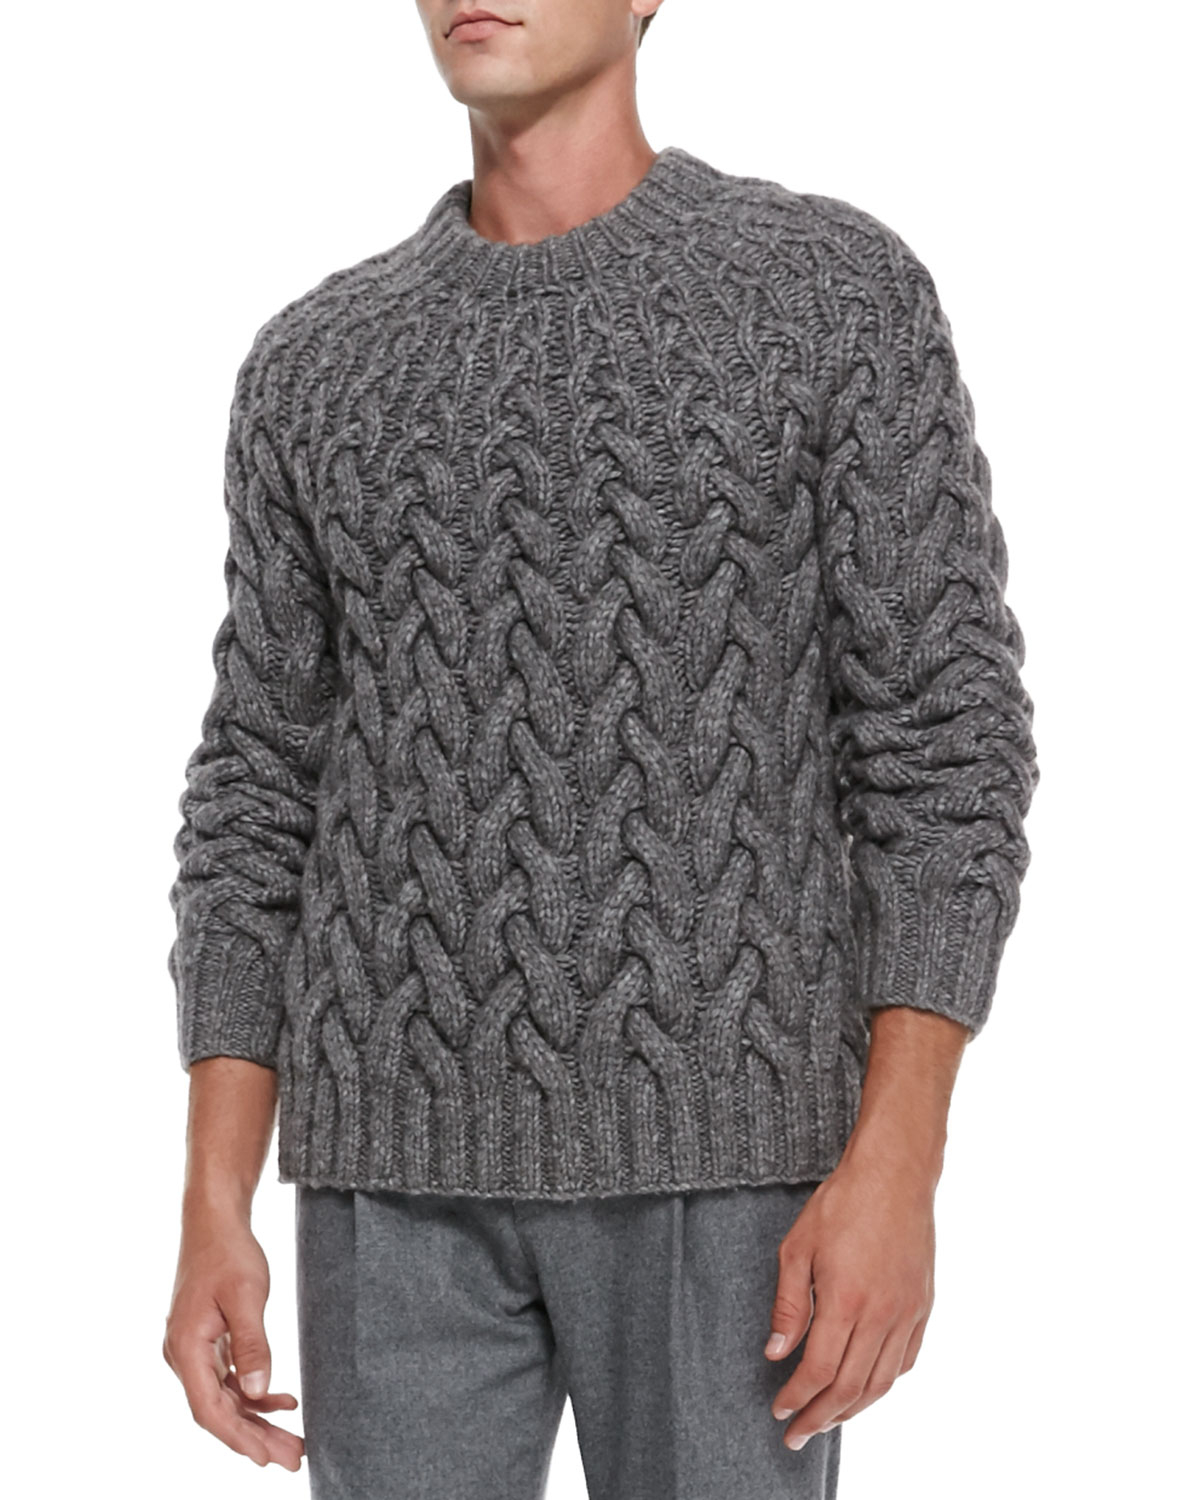 Lyst - Michael Kors Chunky Cable-Knit Sweater in Gray for Men